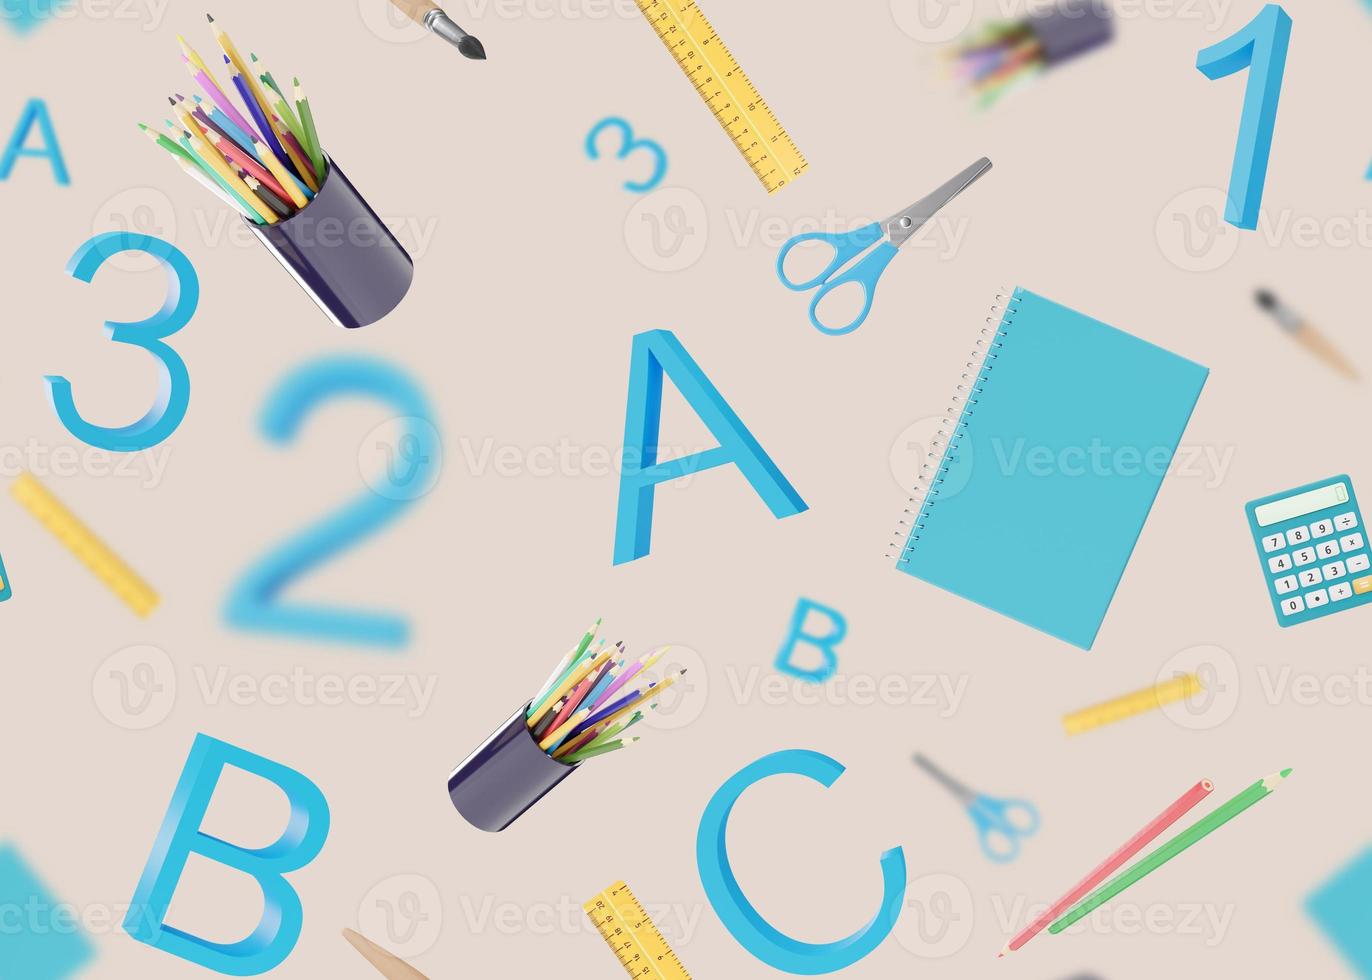 Seamless pattern with school stationery items on cream background. Colorful background with school supplies, texture. Eye-catching design. Pen, pencils, scissors, notebook, ruler. 3D rendering. photo